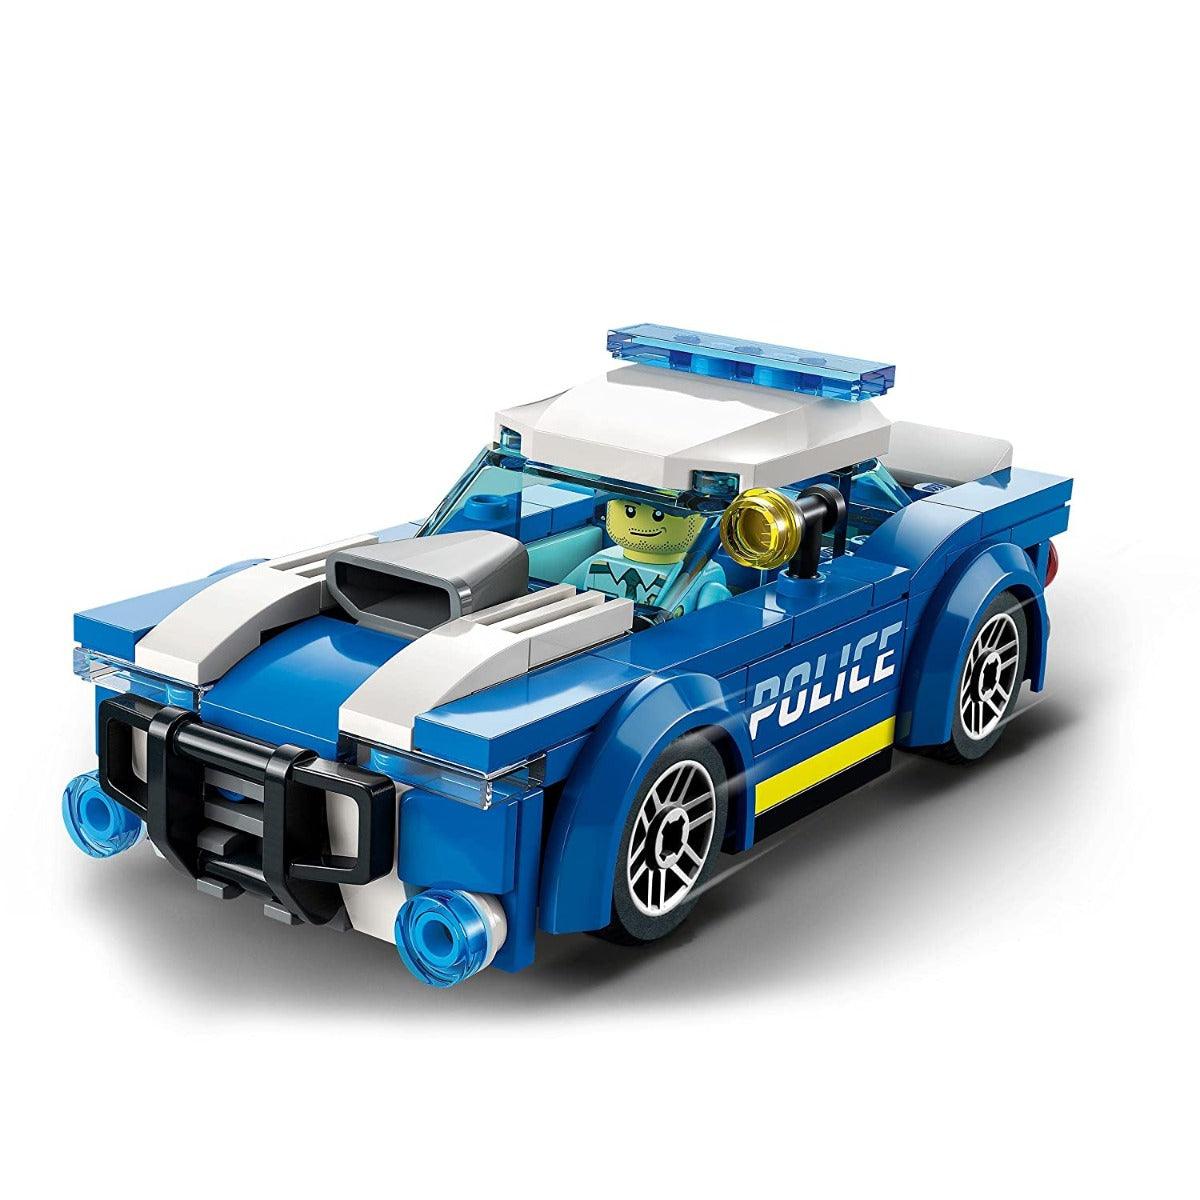 LEGO City Police Car Building Kit for Ages 5+